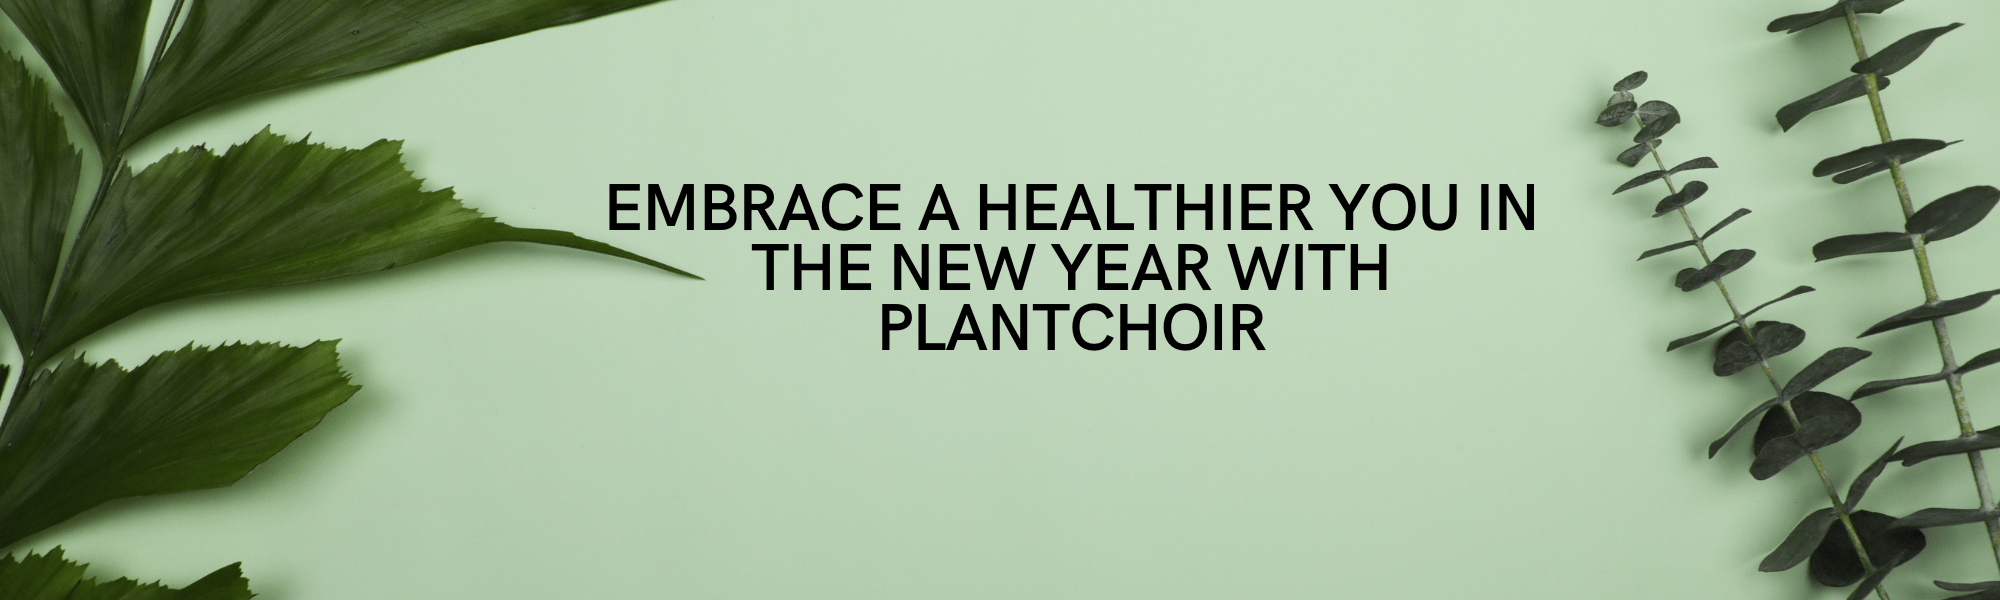 Embrace a Healthier You in the New Year with PLANTChoir - PlantChoir